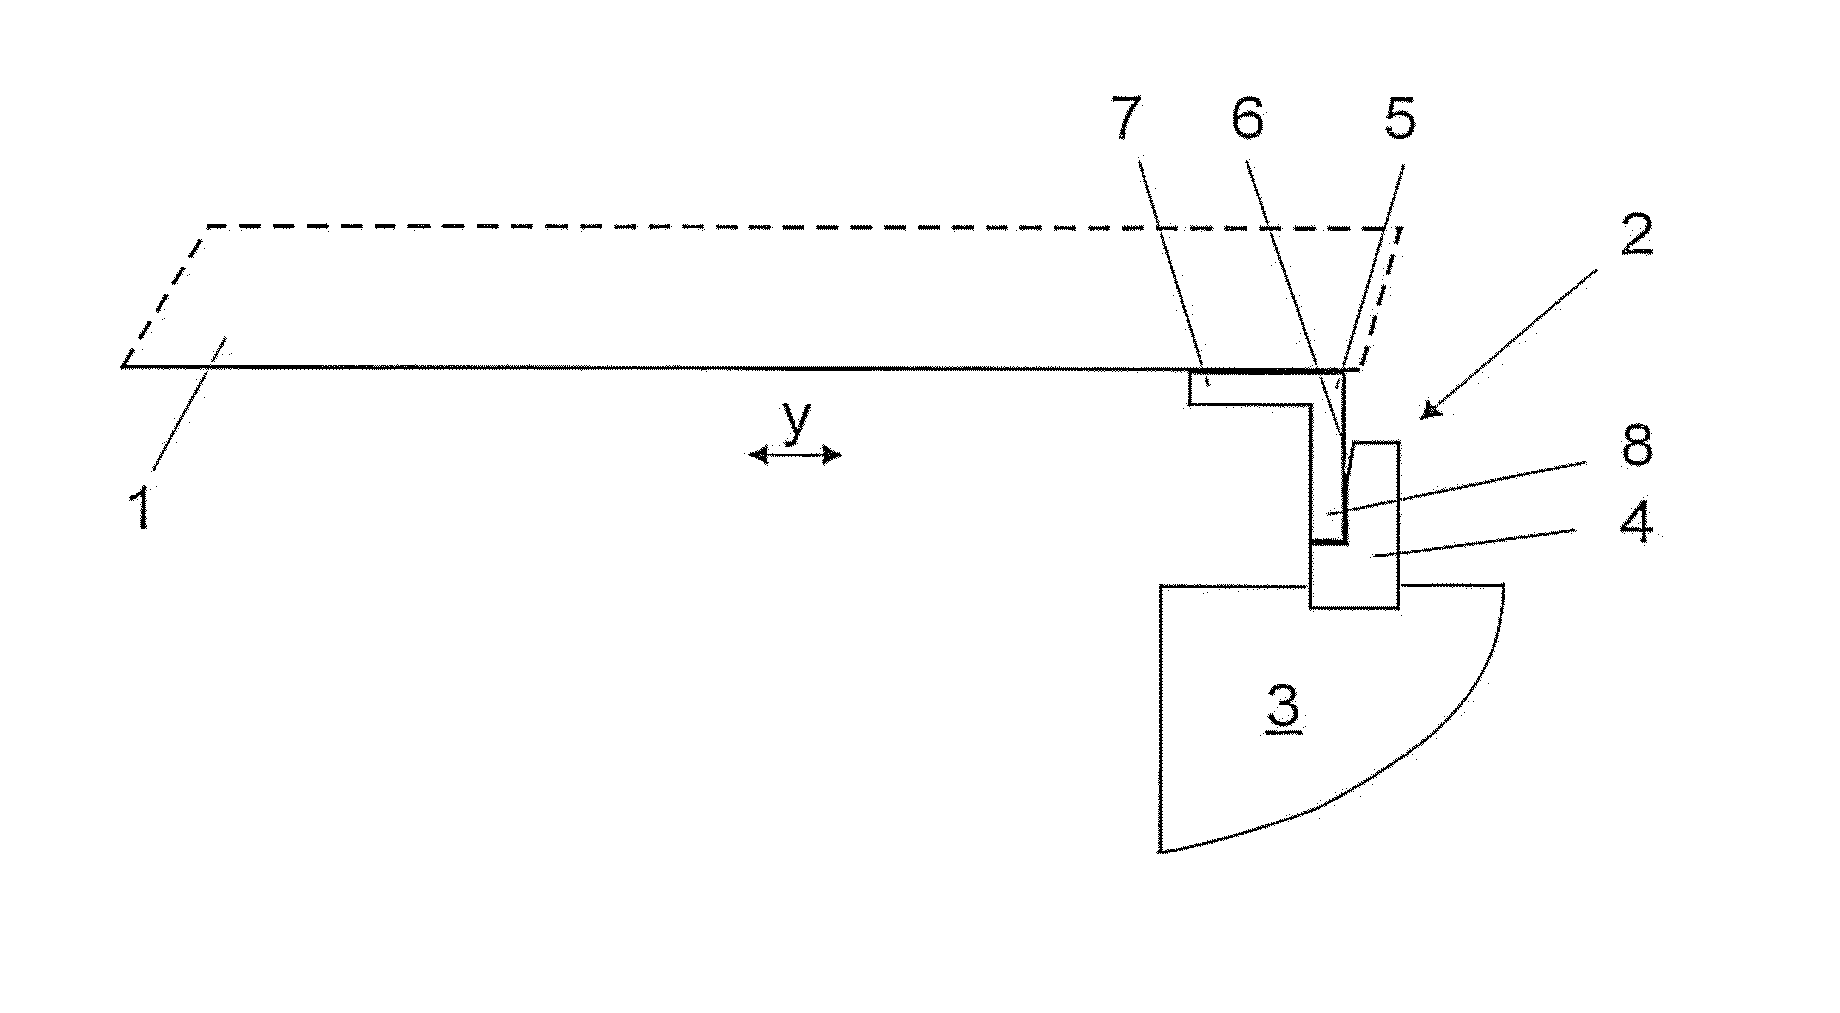 Device for fixing the position of a lid